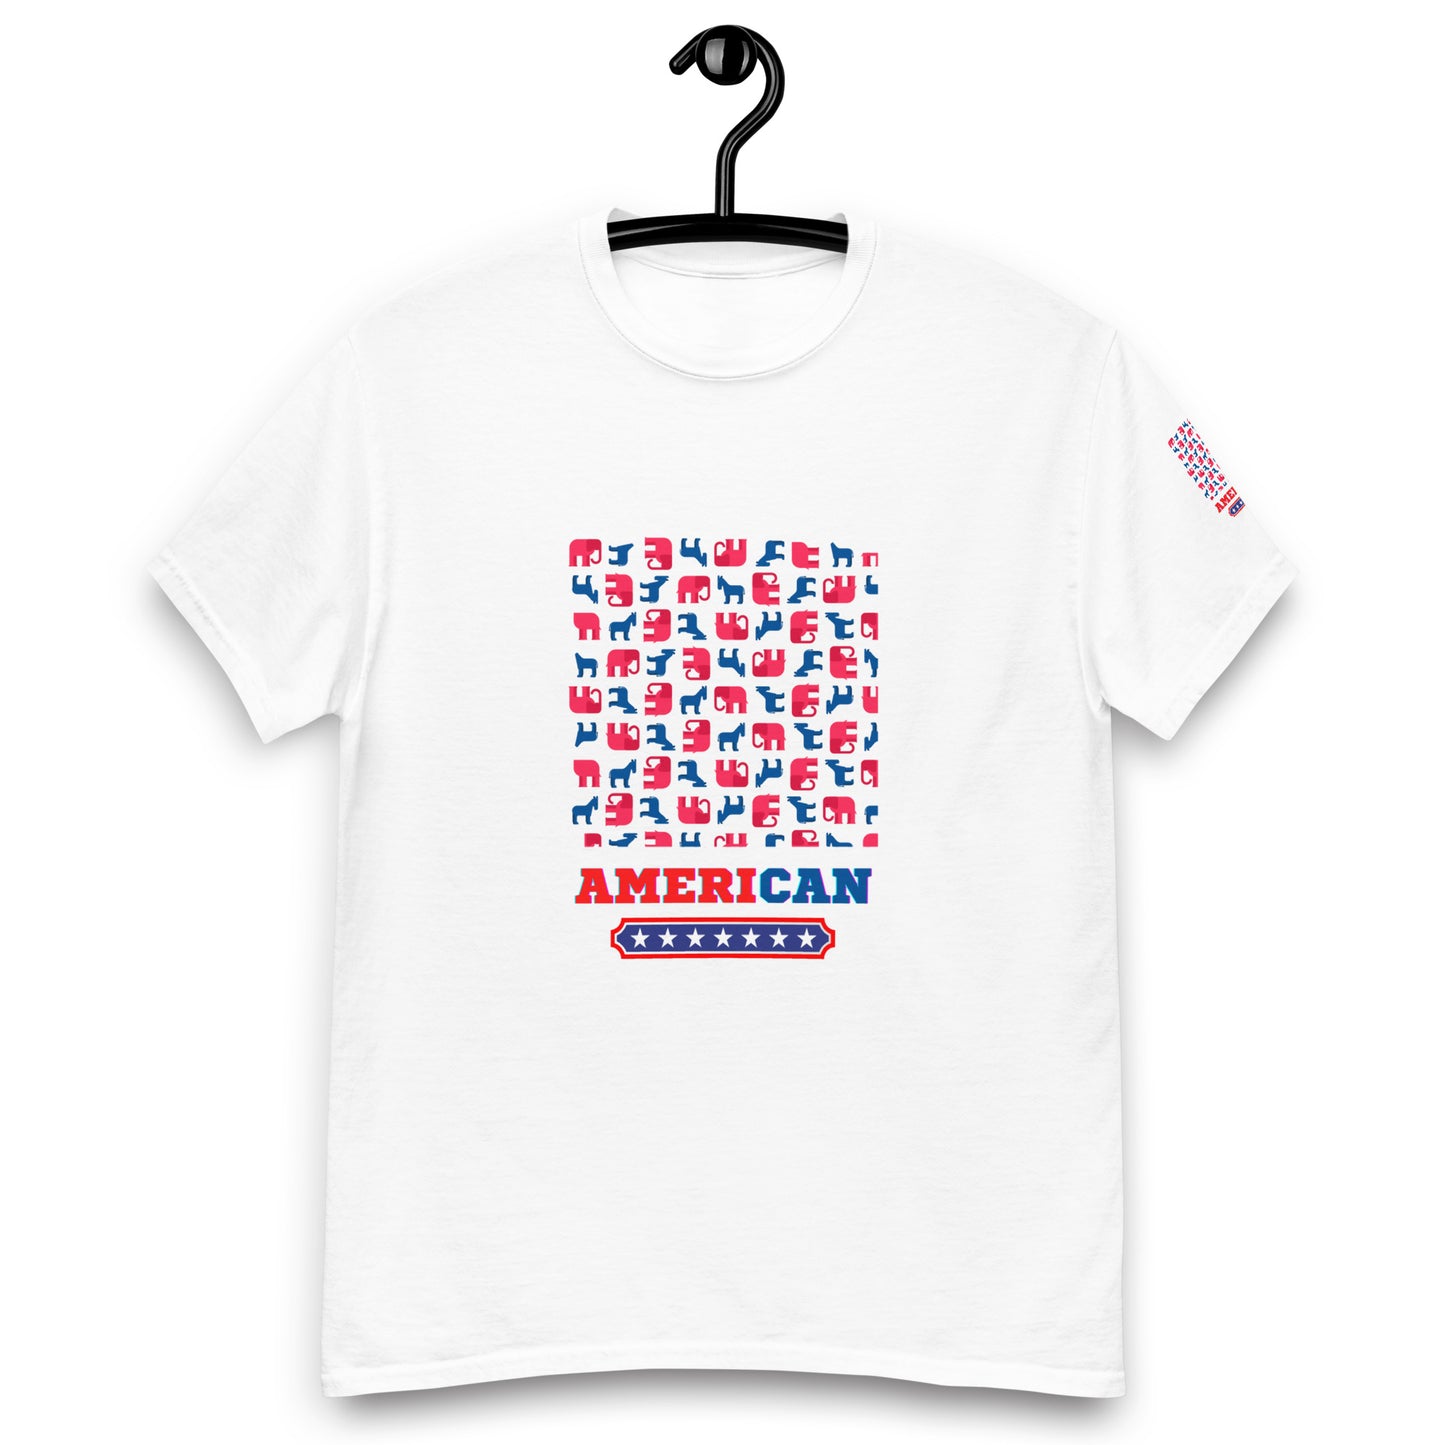 AMERICAN STYLE T–SHIRT "ELEPHANT - THEMED" WHITE FRONT - www.firstamericanstore.com